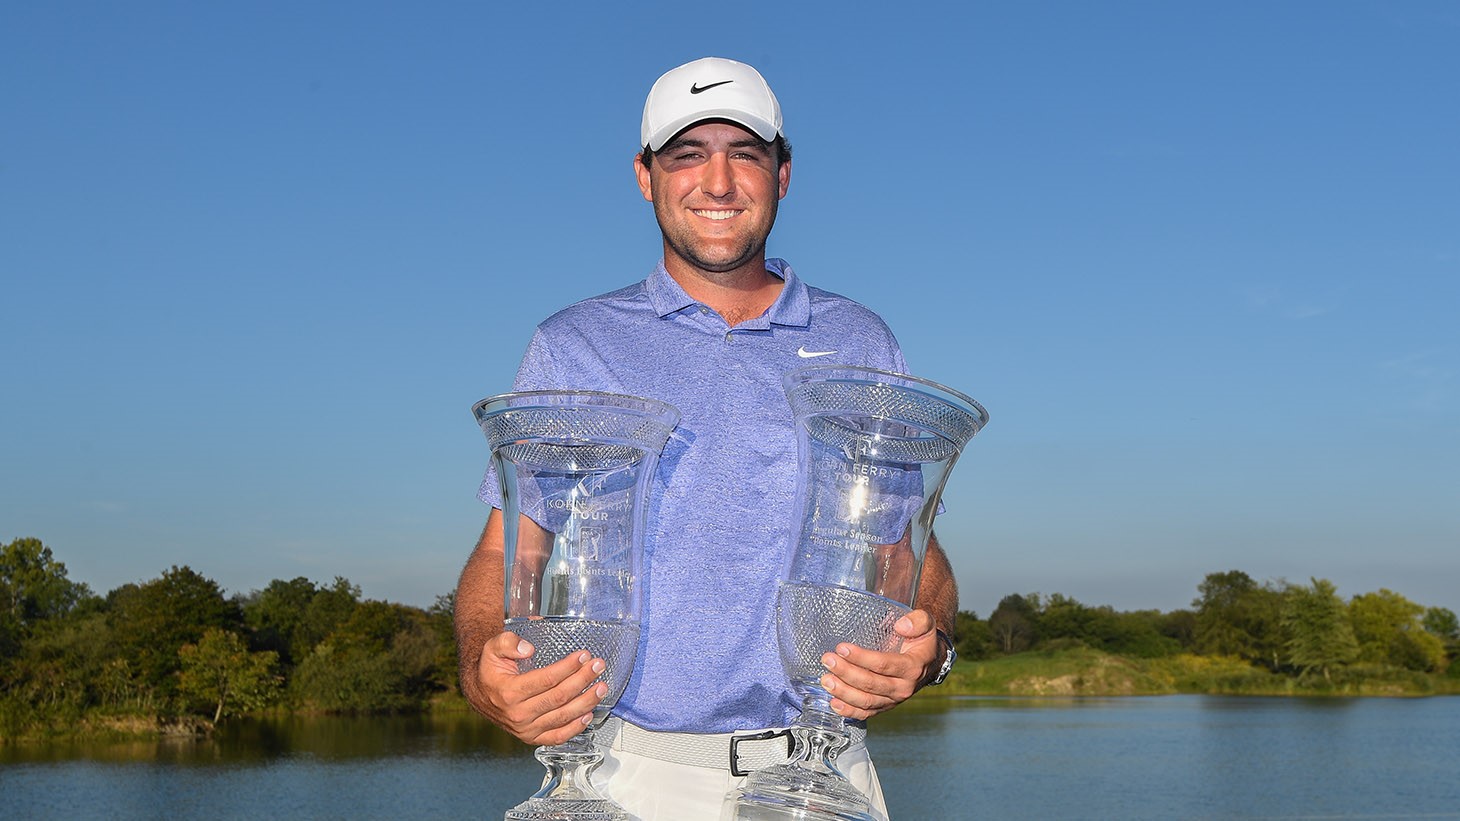 Scottie Scheffler celebrates with two trophies as Finals points leader and Regular Season points leader on the 2019 Korn Ferry Tour